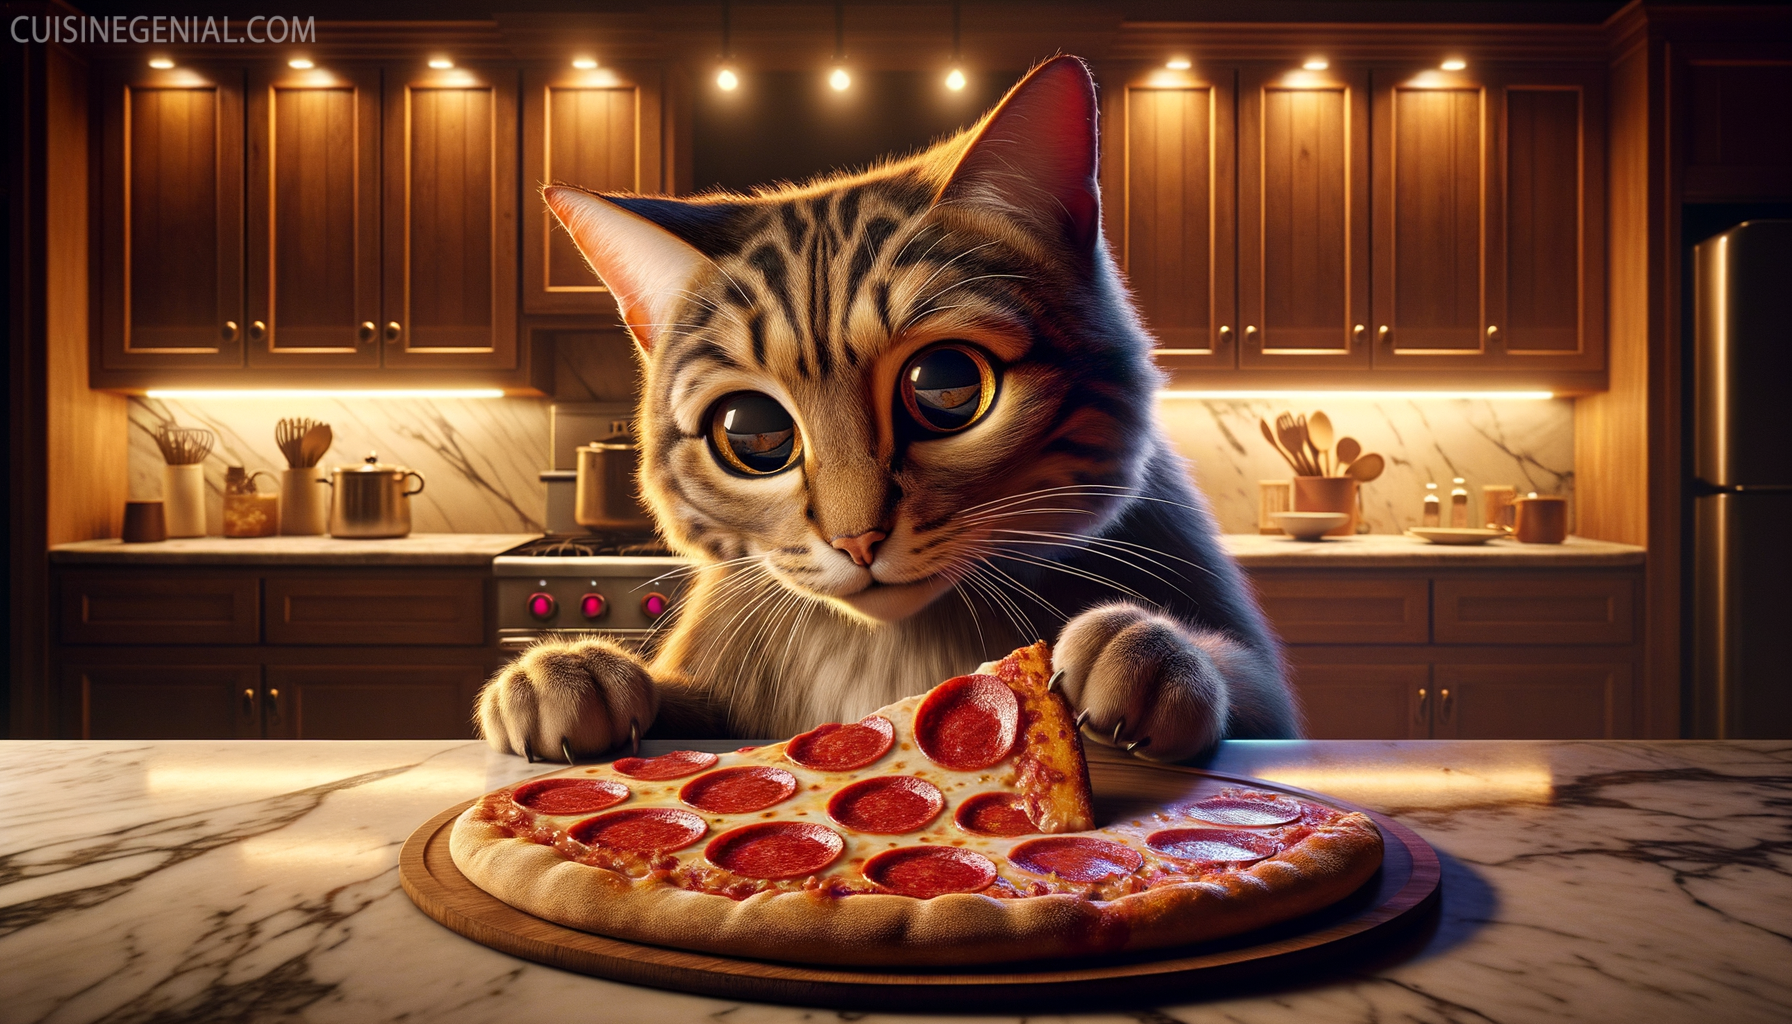 Curious cat examining a slice of pizza in a cozy kitchen setting.